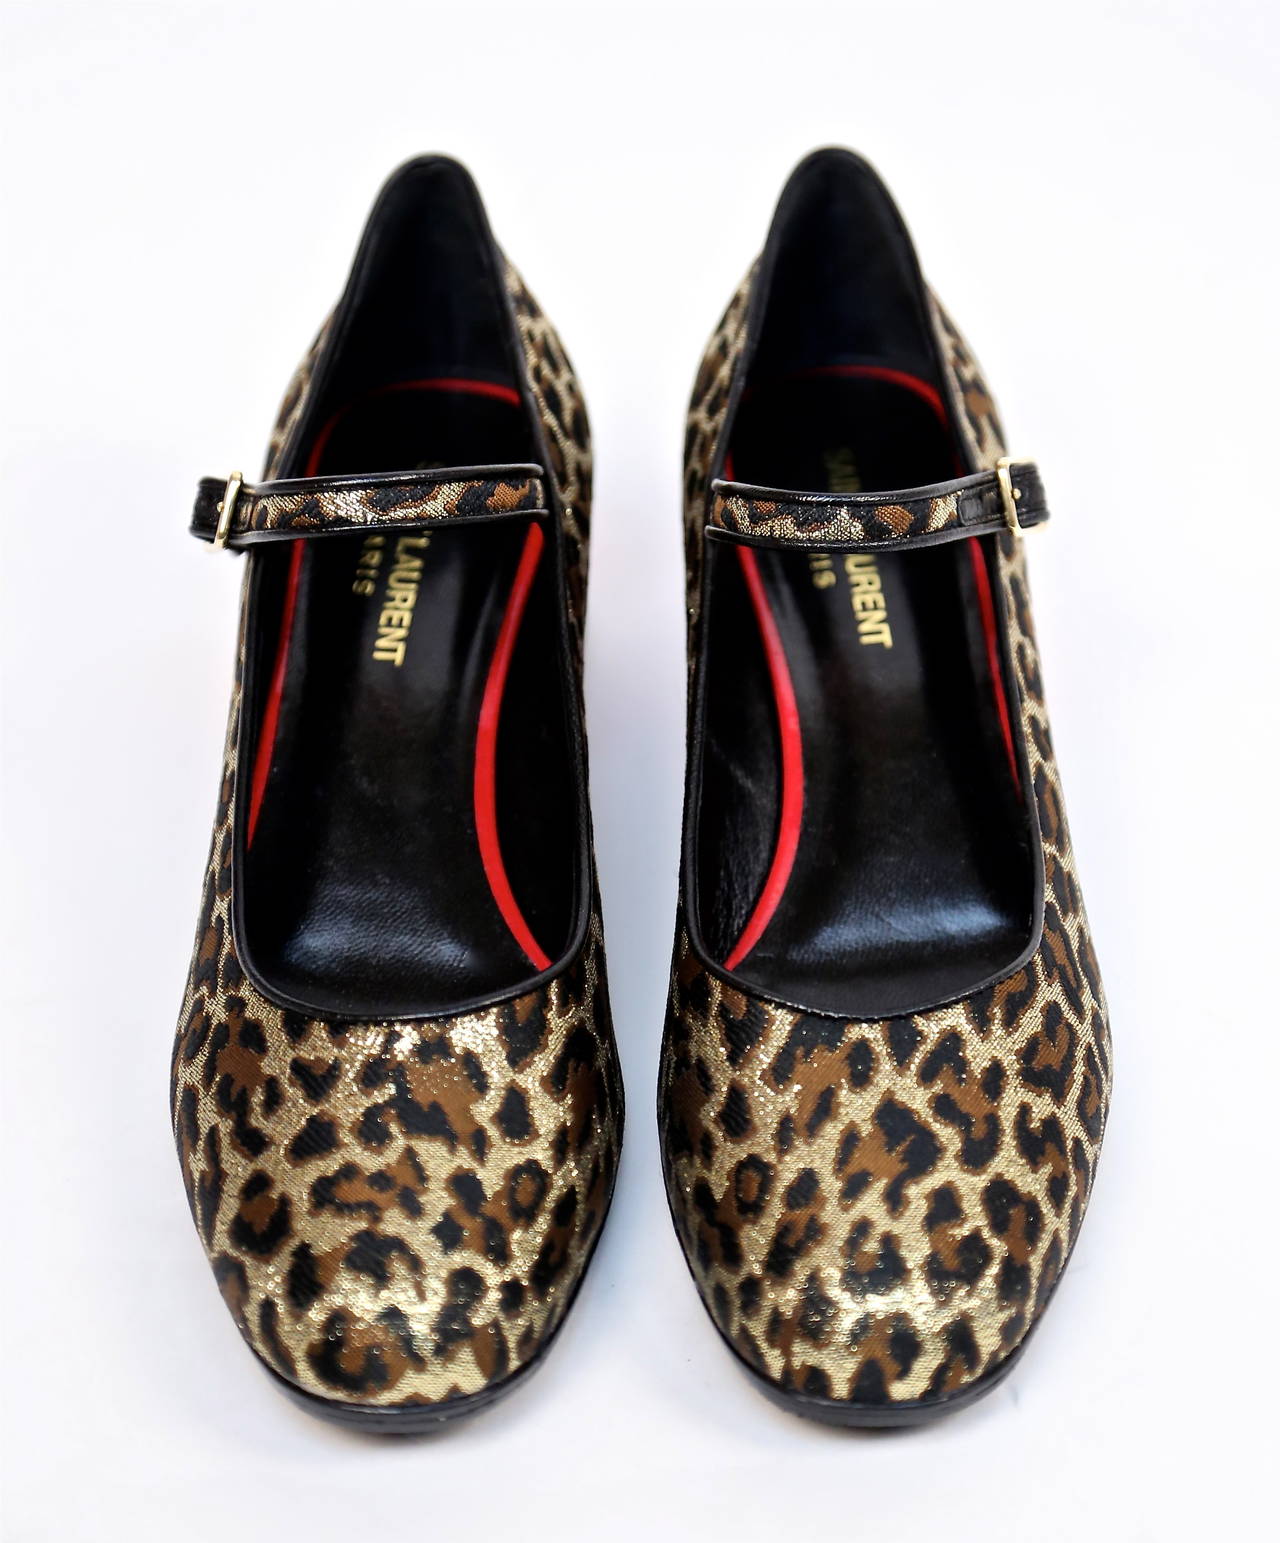 Unworn, metallic woven leopard fabric Mary Janes with leather piping and red patent leather block heel from Saint Laurent. Size 38 (run narrow). Food beds measures approximately: length just under 10